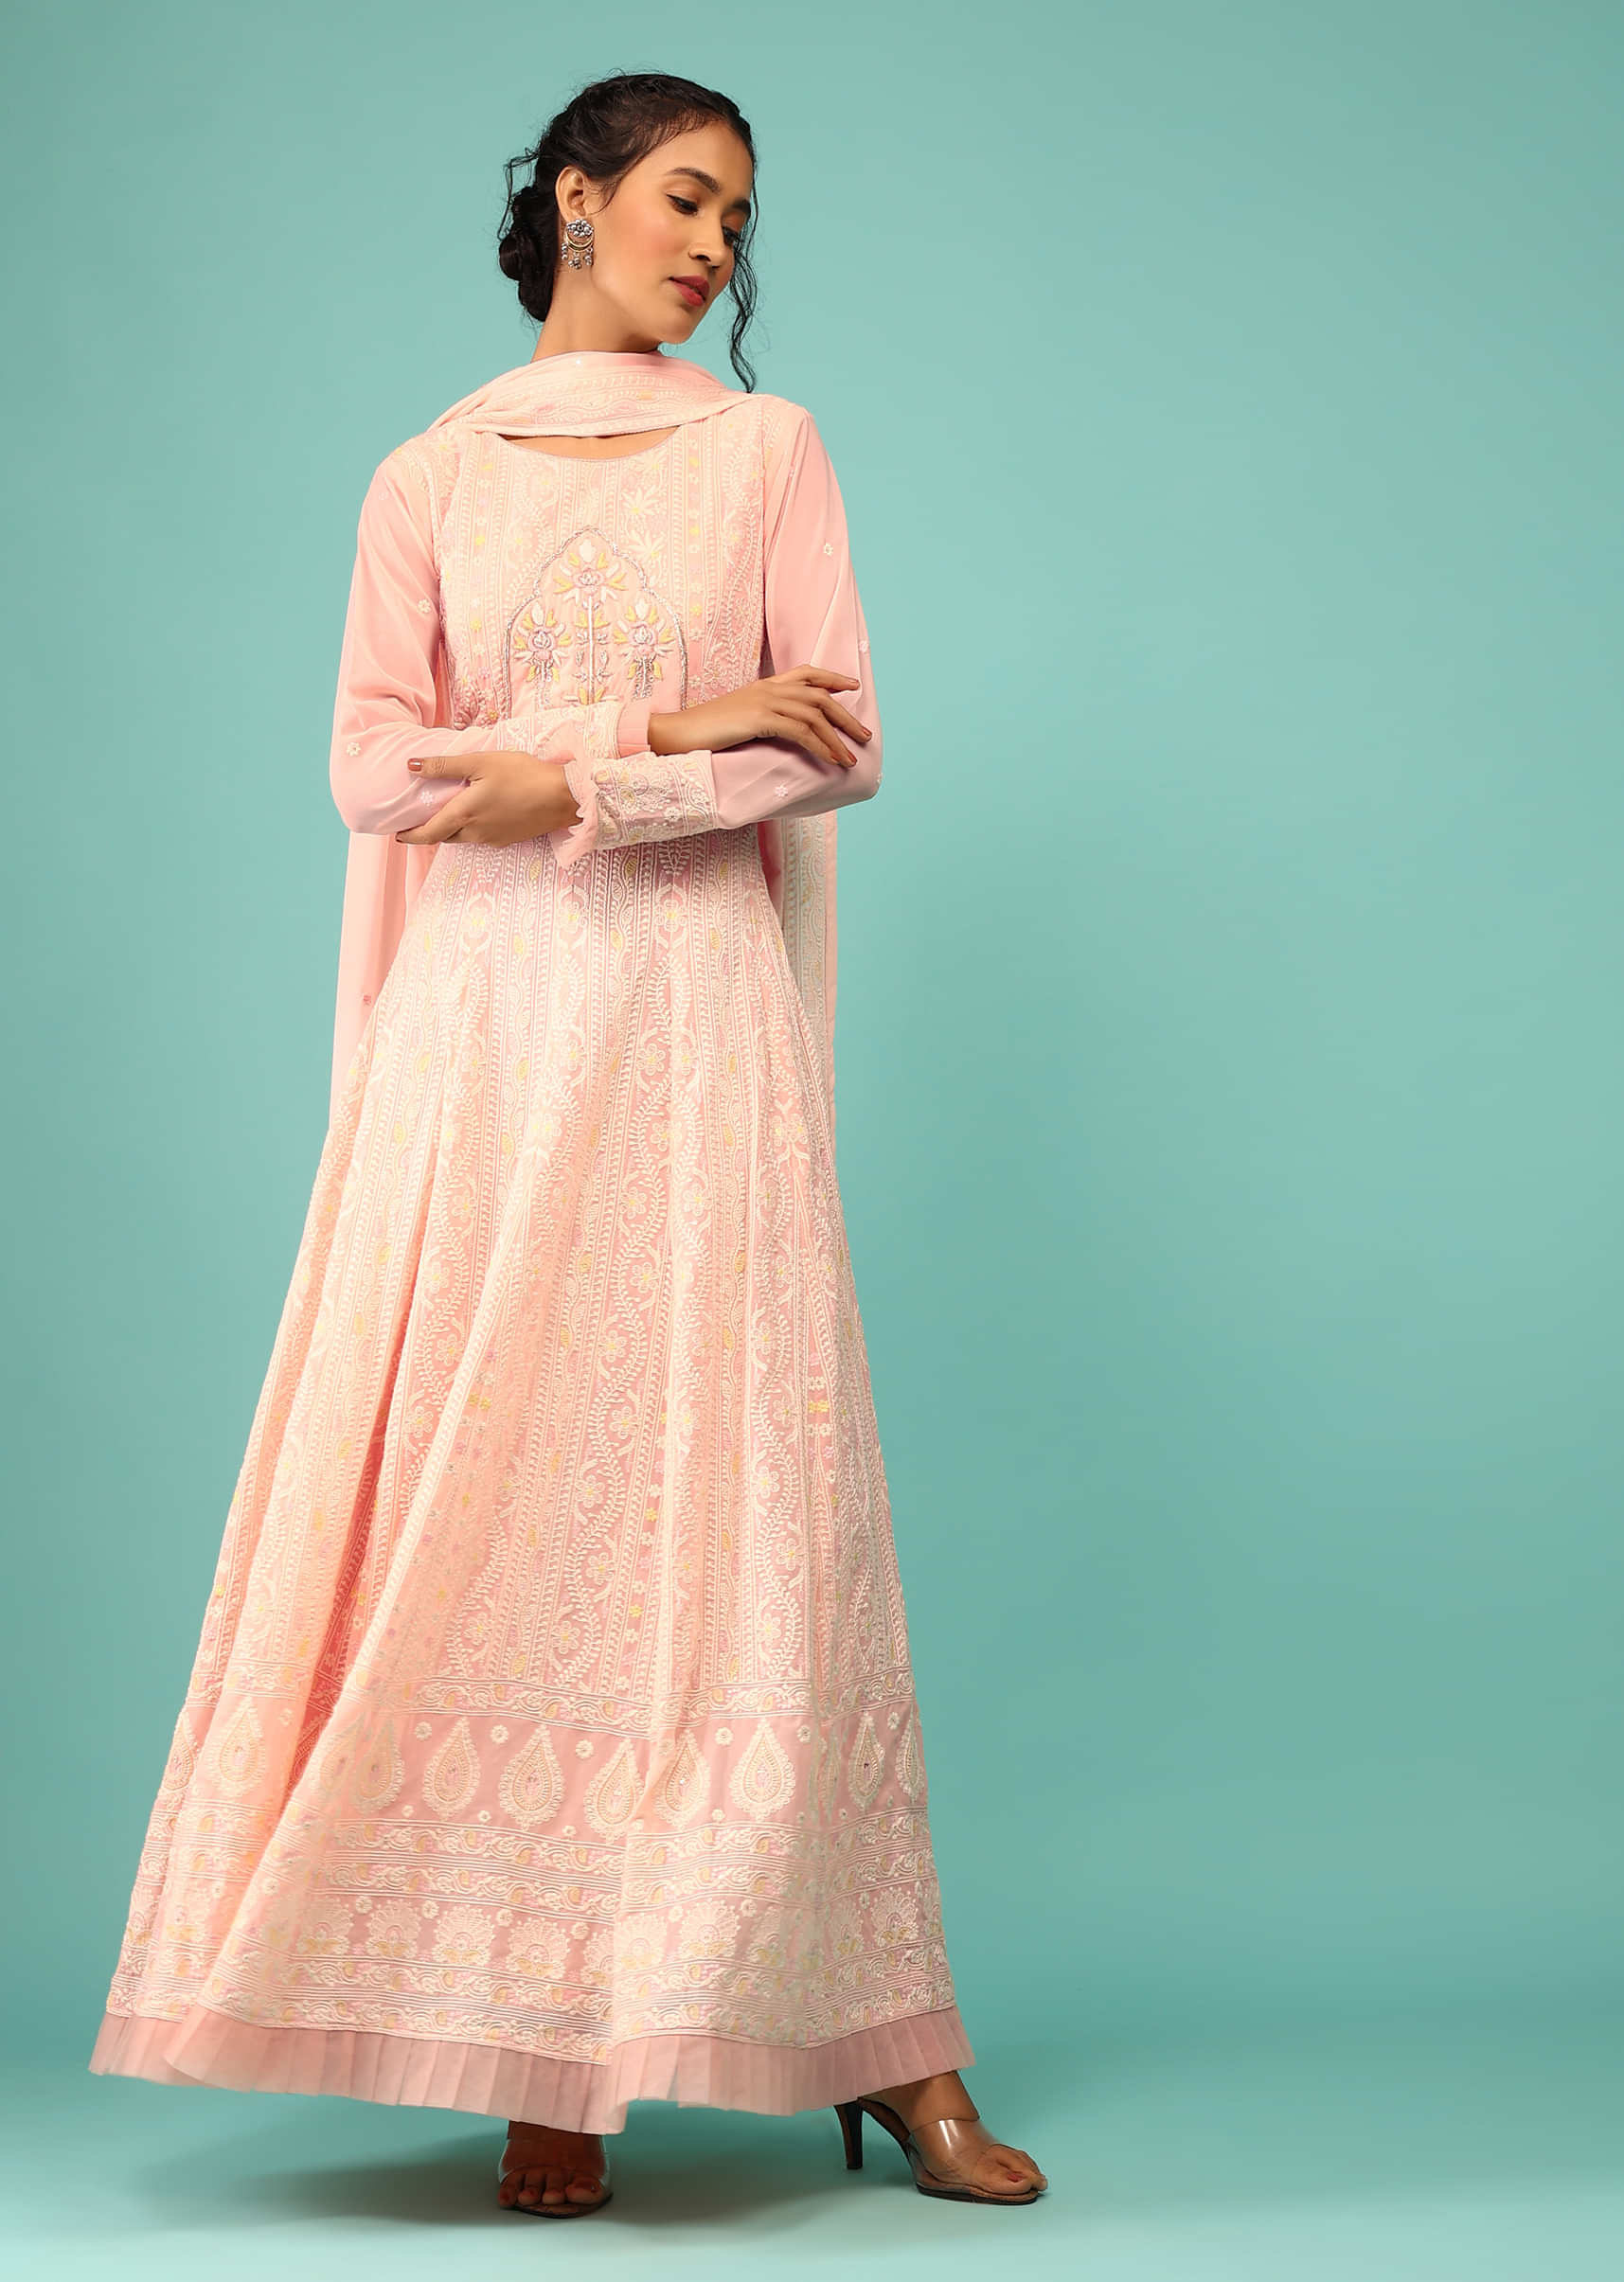 Candy Pink Anarkali Suit With Lucknowi Thread Work And Zardozi Embroidered Motif